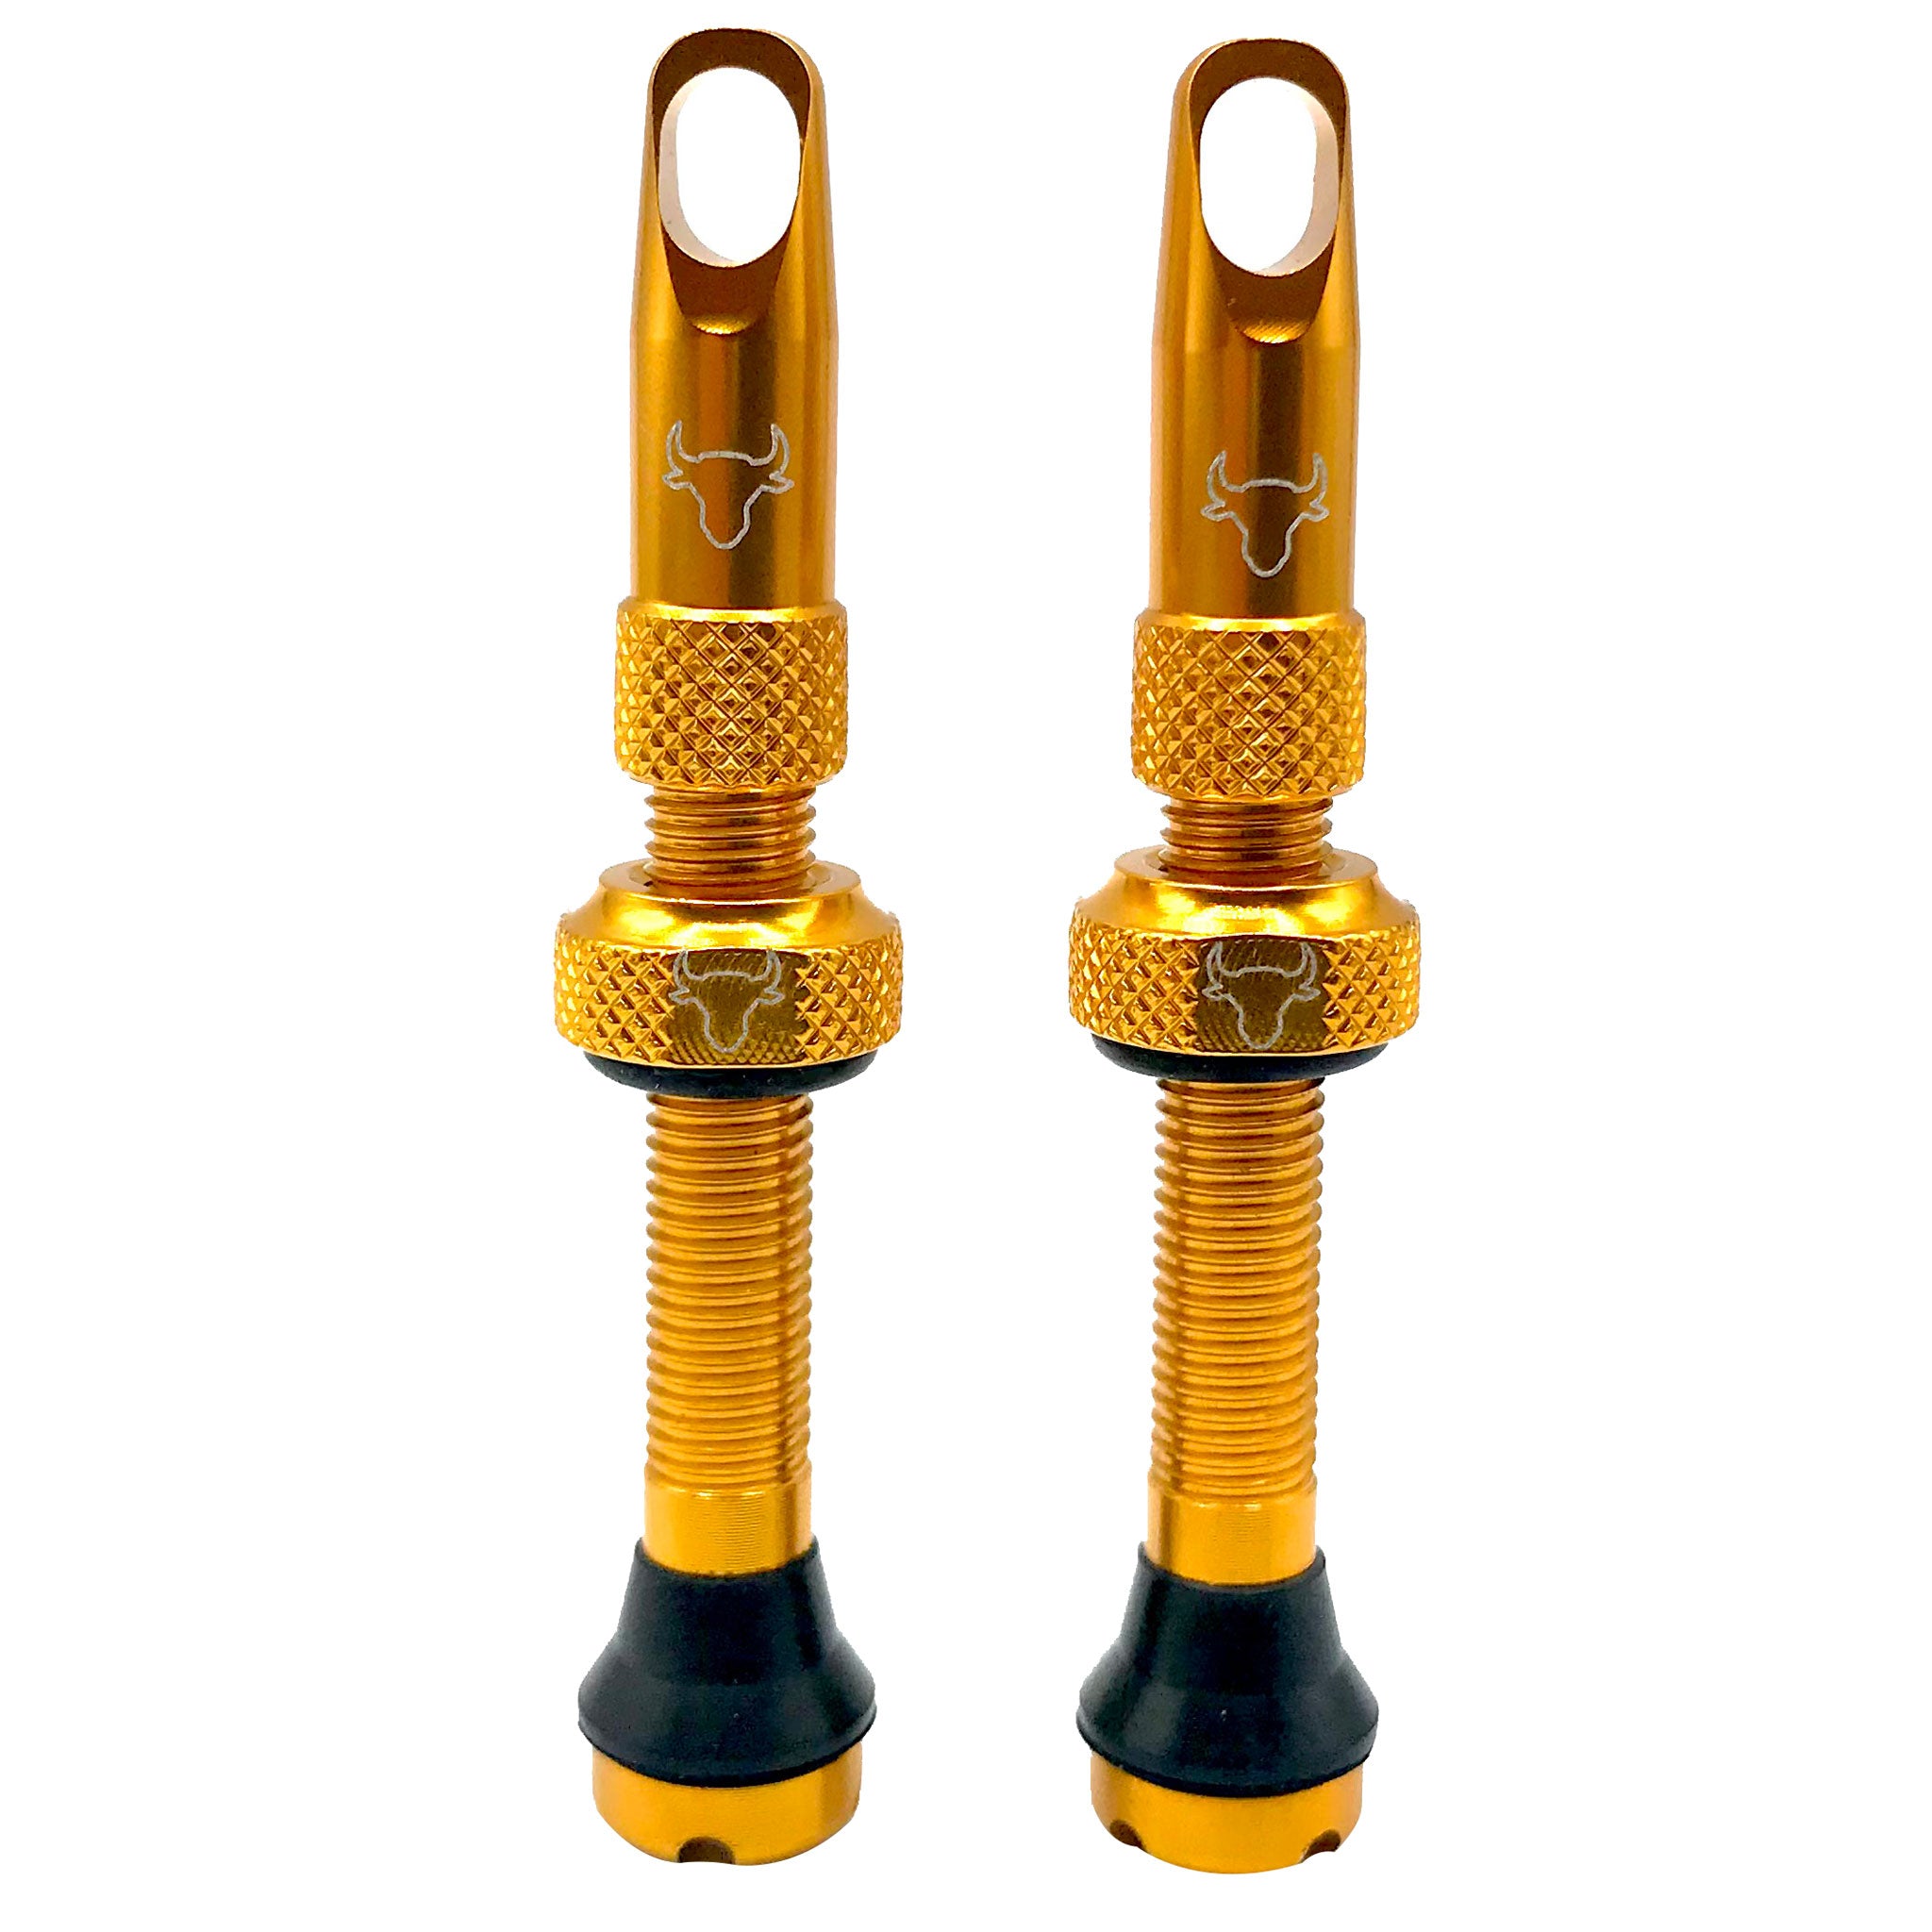 Hold Fast Cycling Tubeless Valve Stem 42mm (Pair) - Gold